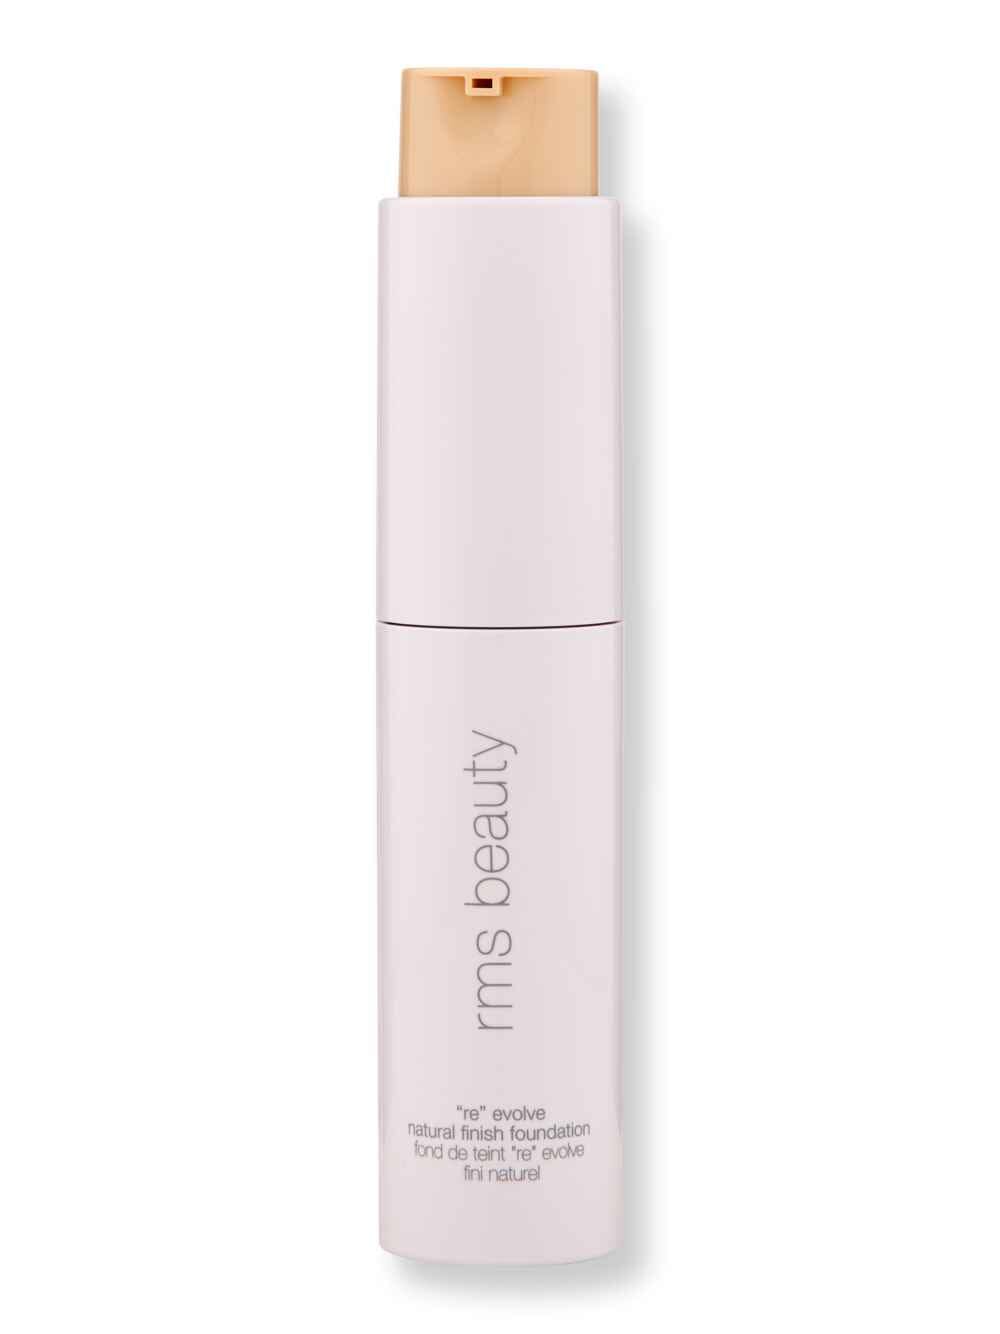 RMS Beauty RMS Beauty ReEvolve Natural Finish Foundation 00 Tinted Moisturizers & Foundations 